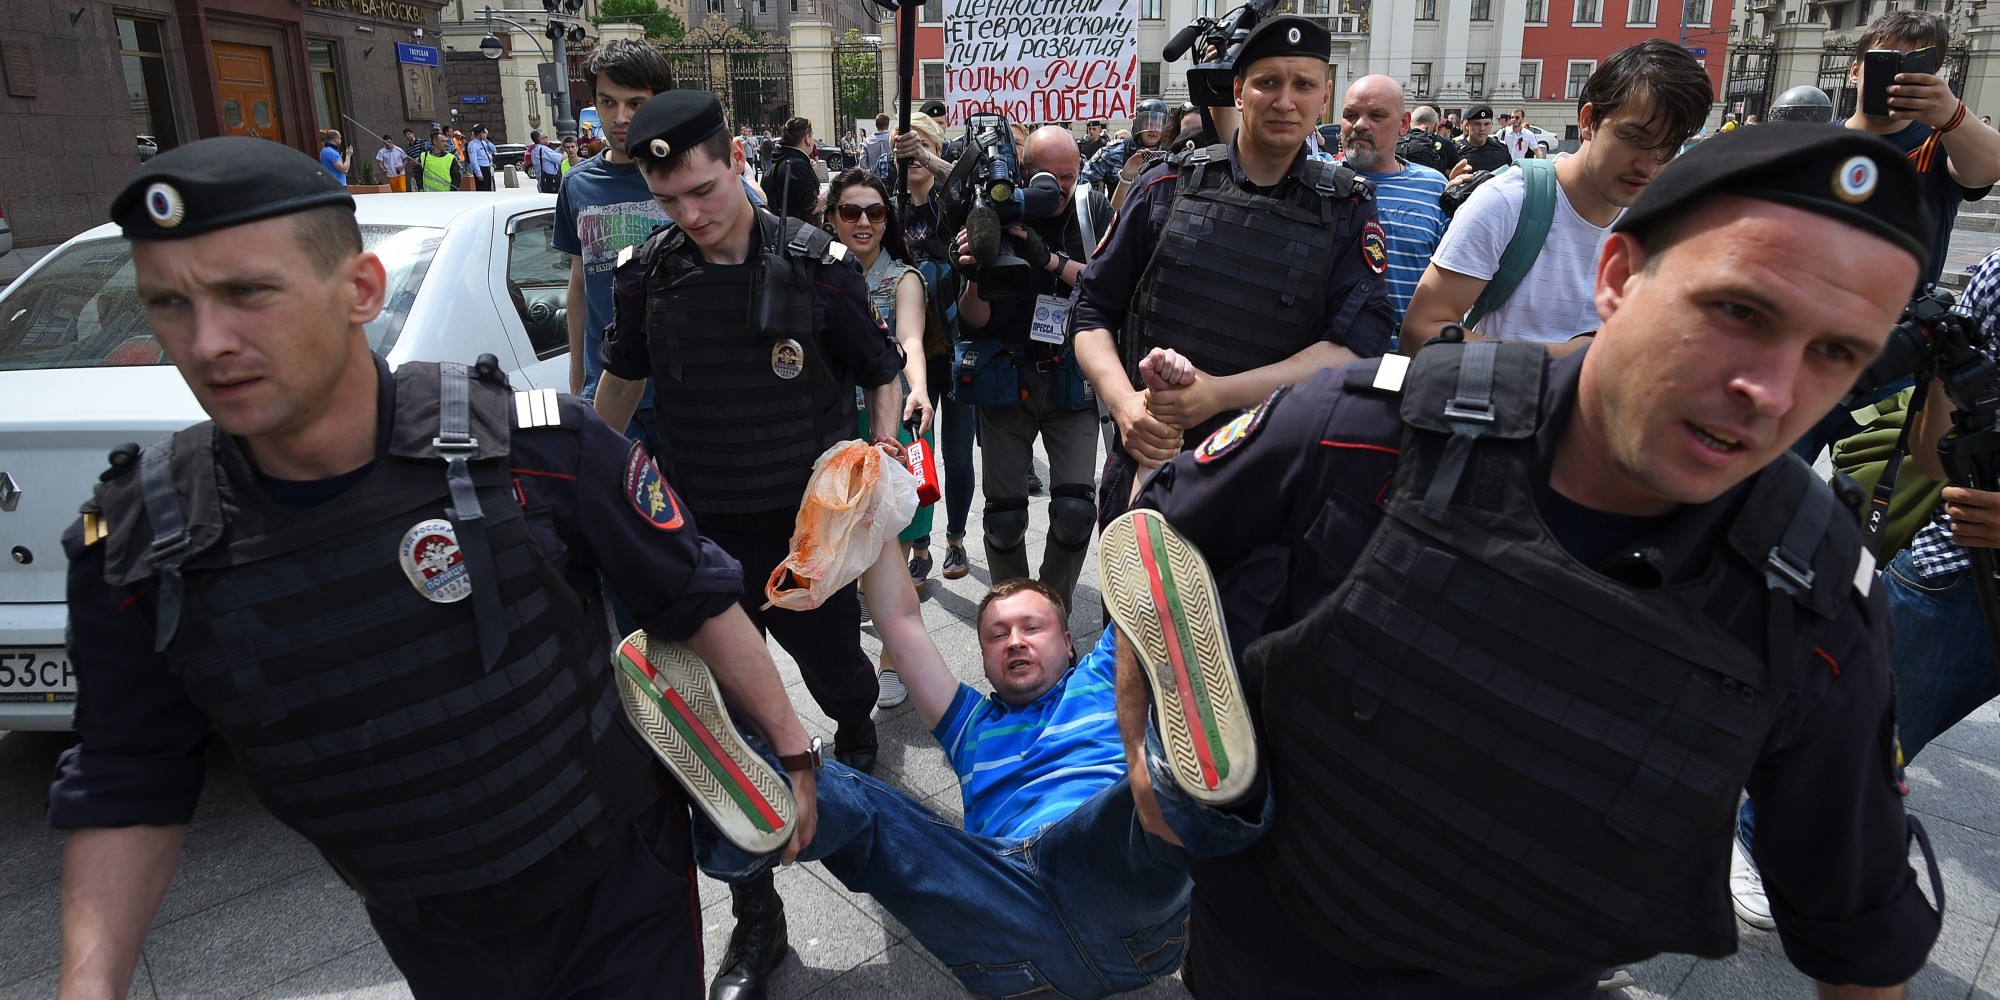 Russian Gay Activists Detained After Unsanctioned Lgbt Rights Rally In